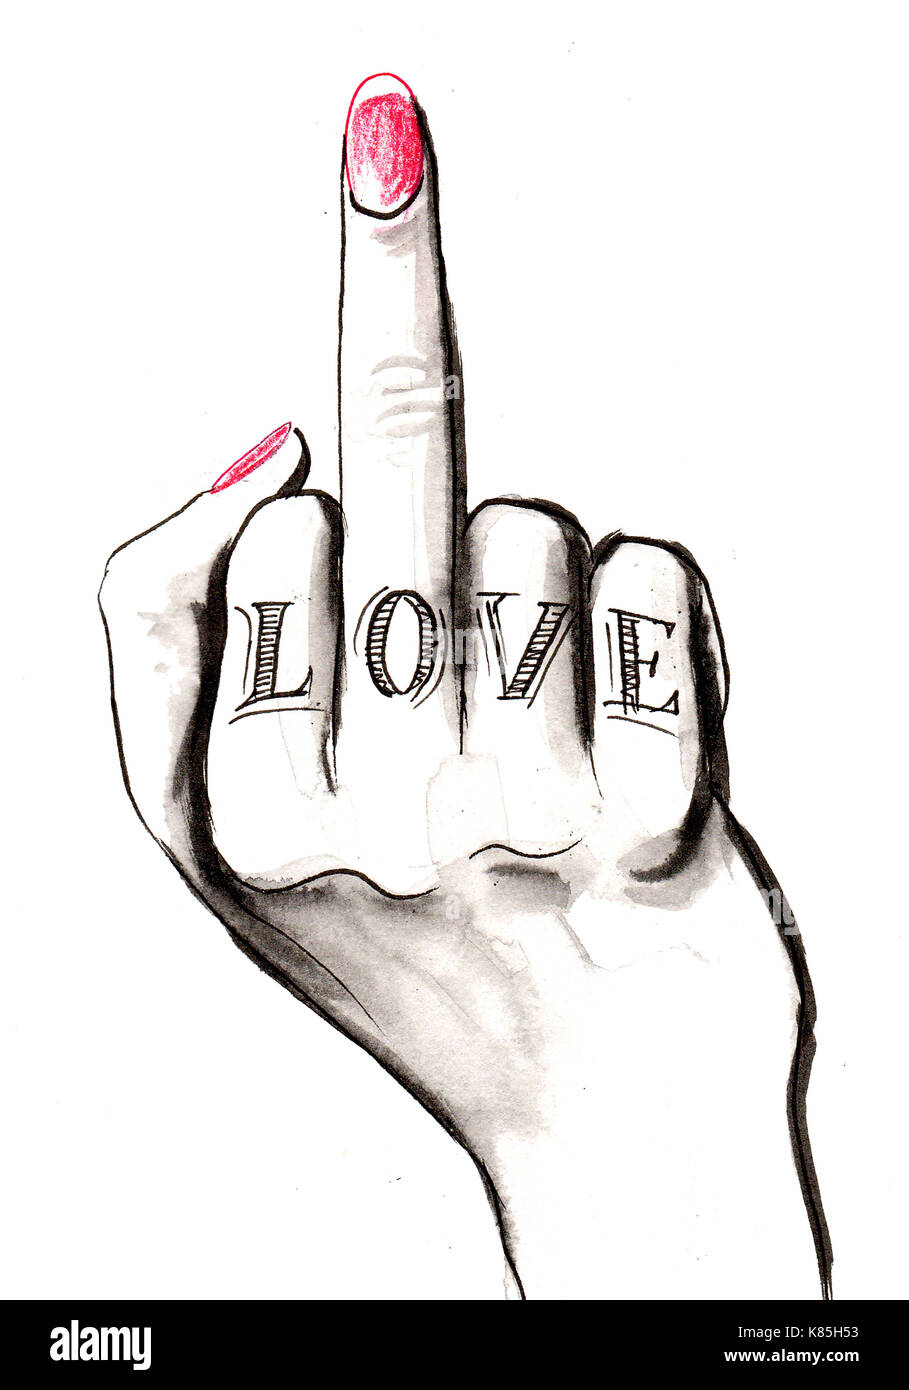 3,456 Middle Finger Drawing Images, Stock Photos & Vectors | Shutterstock